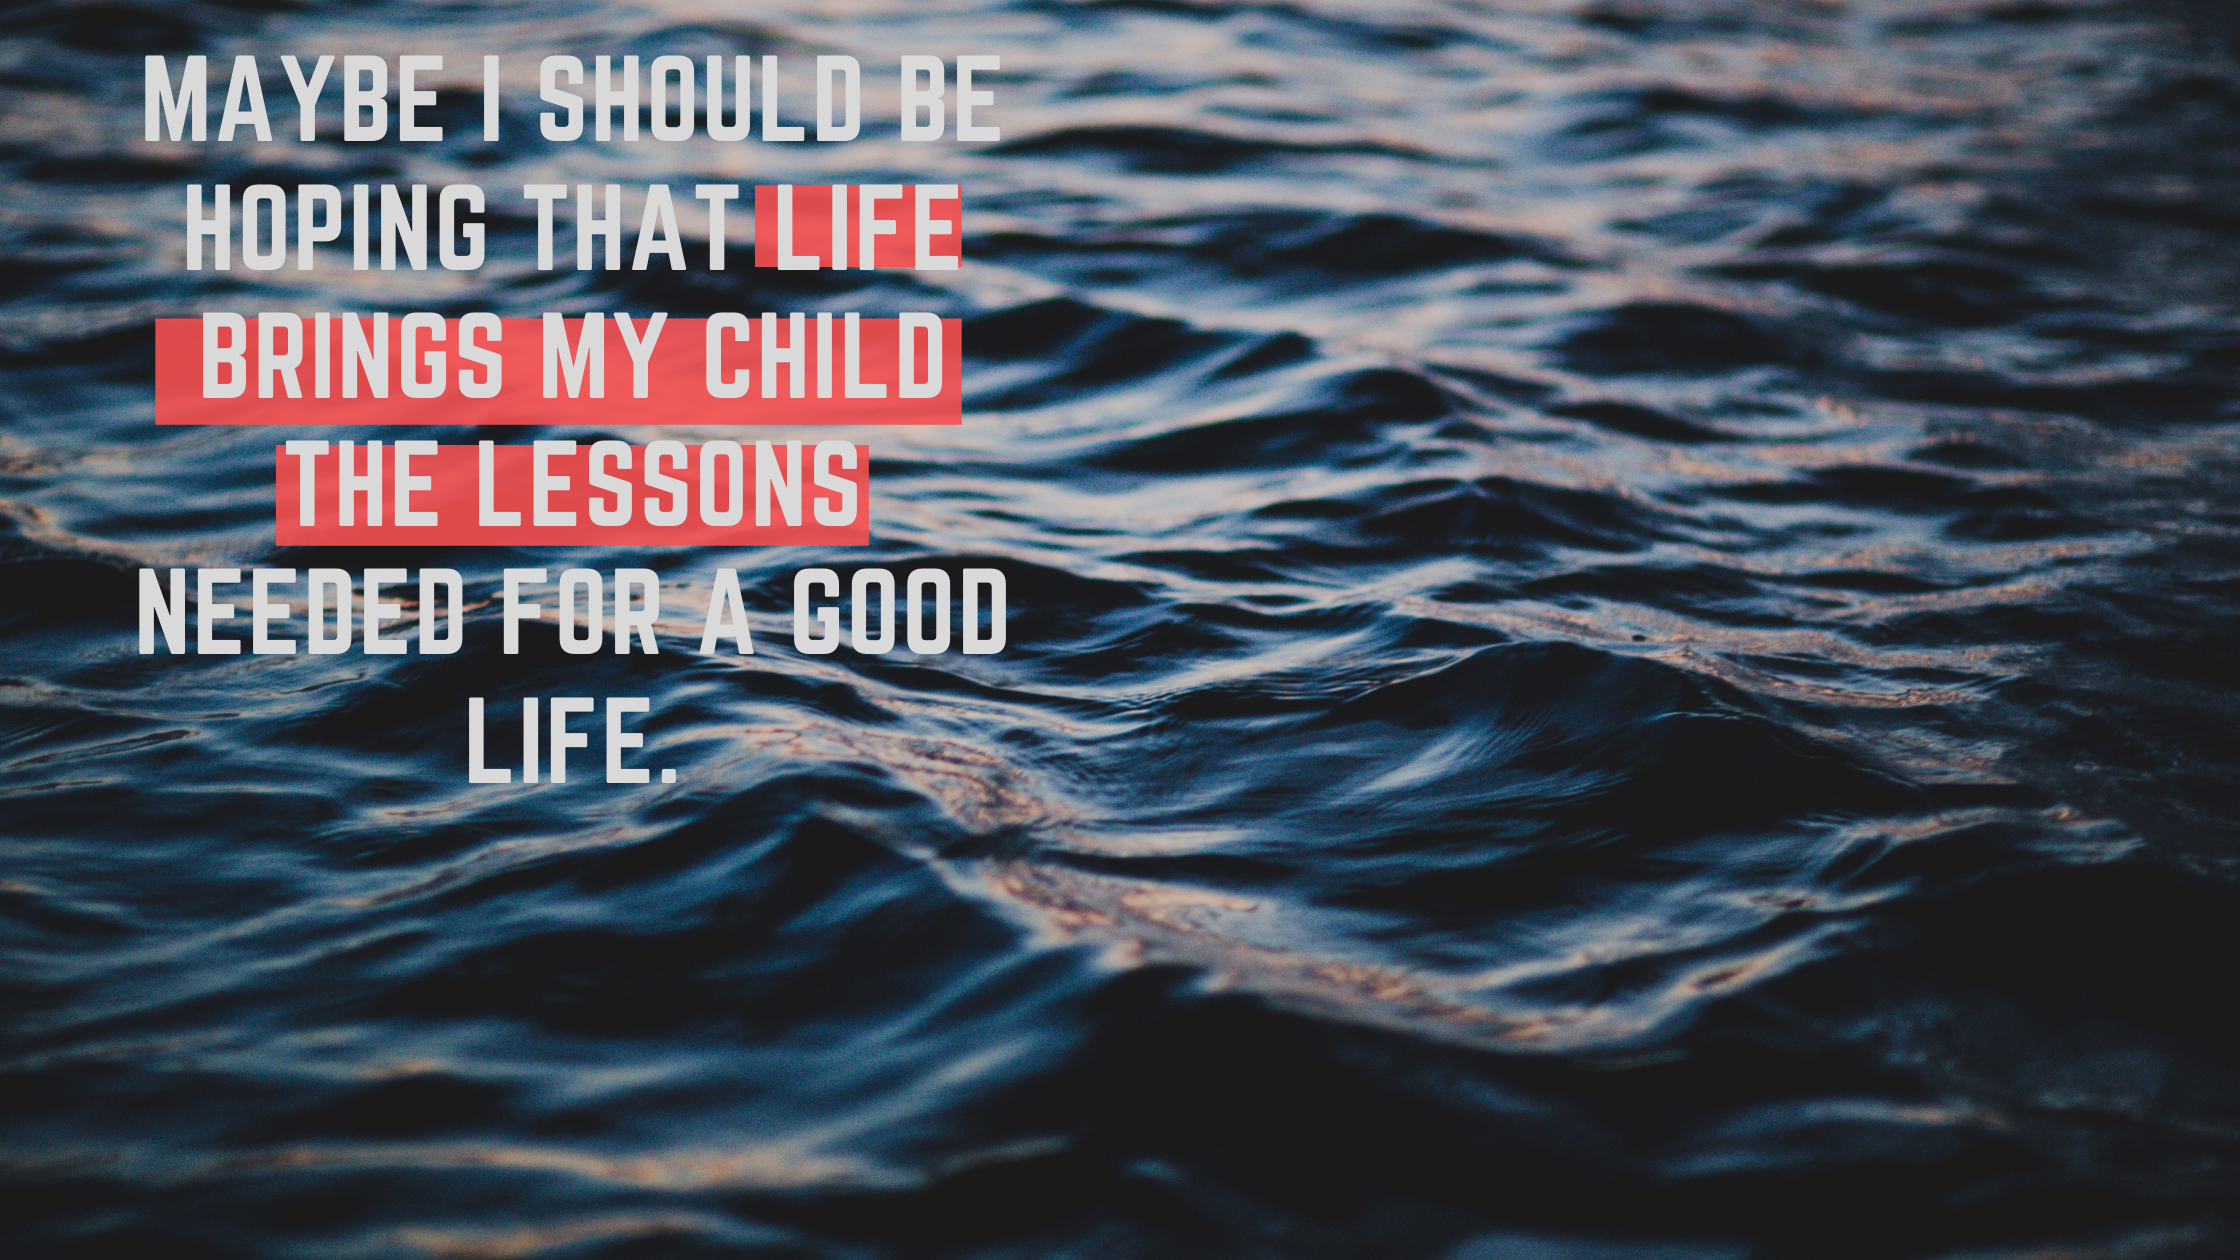 Maybe I should be hoping that life brings my child the lessons needed for a good life.